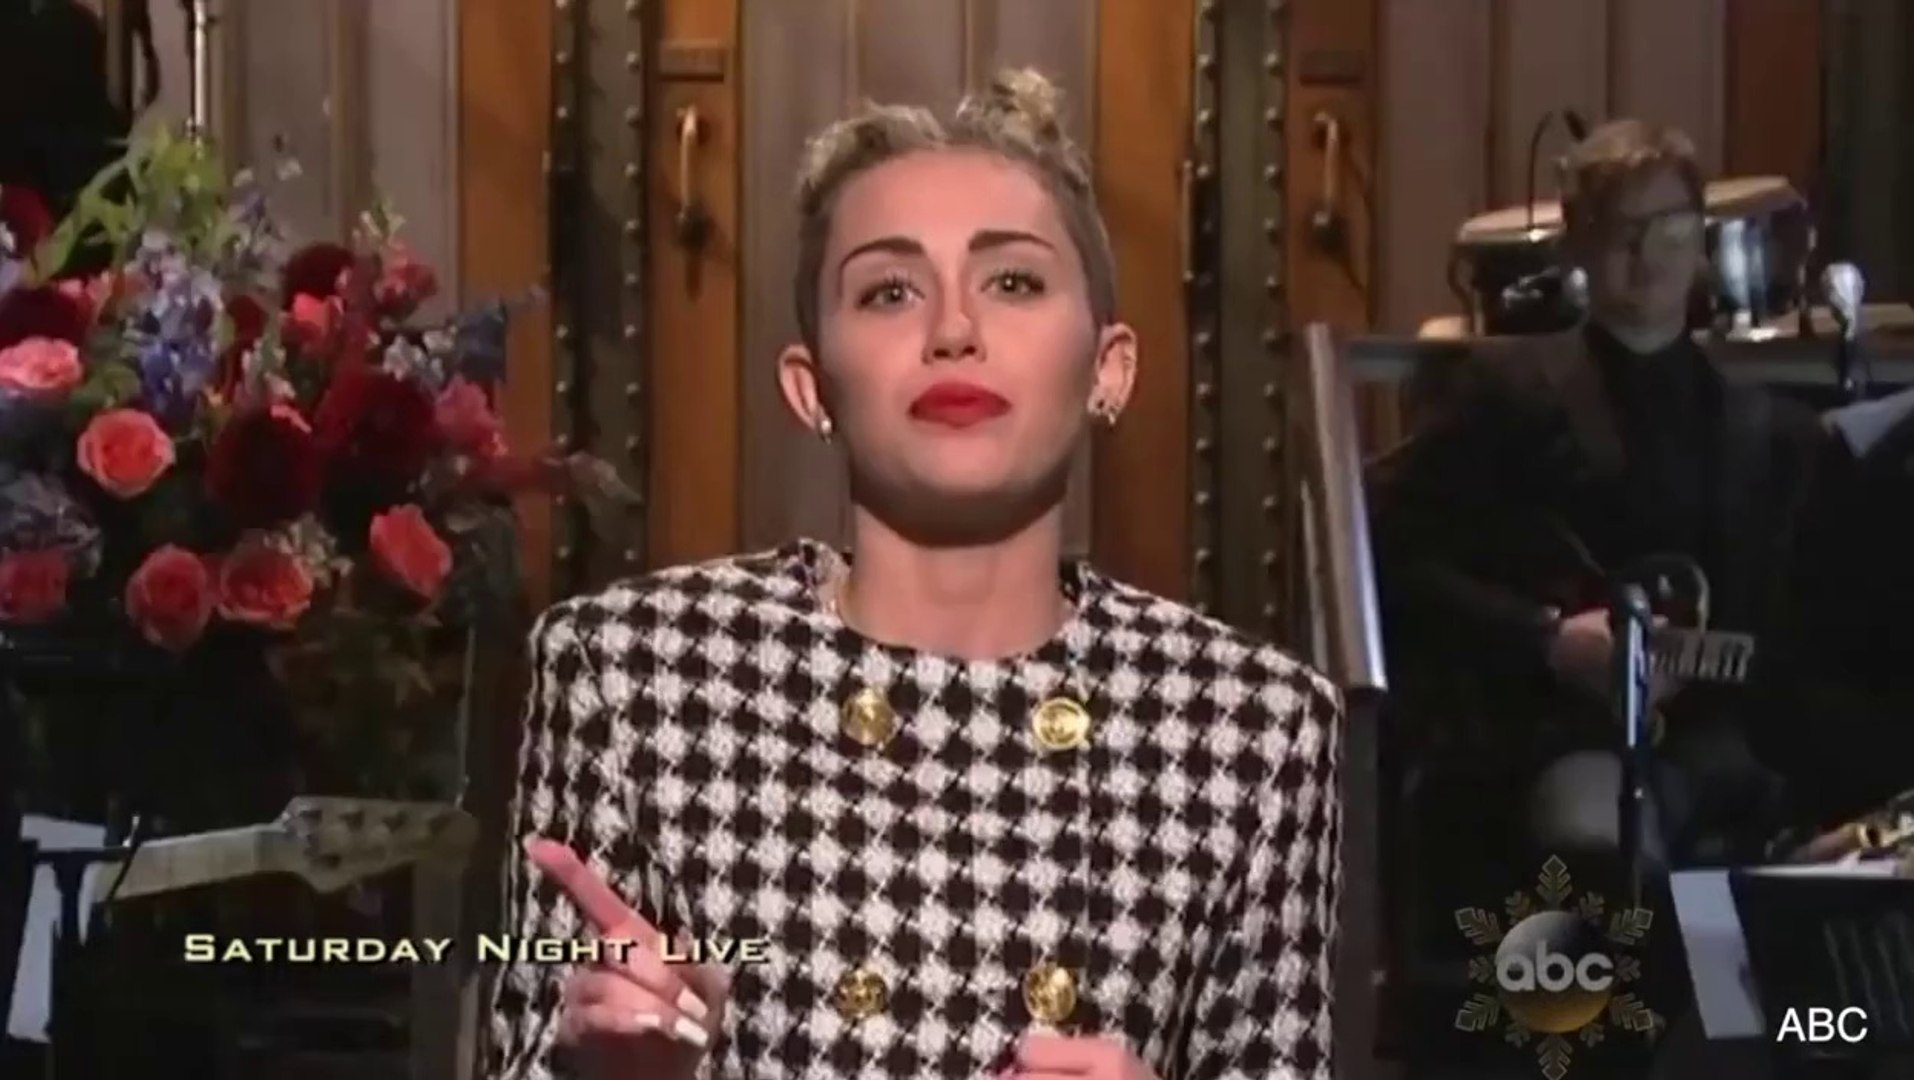 College Offers Sociology Course on Miley Cyrus